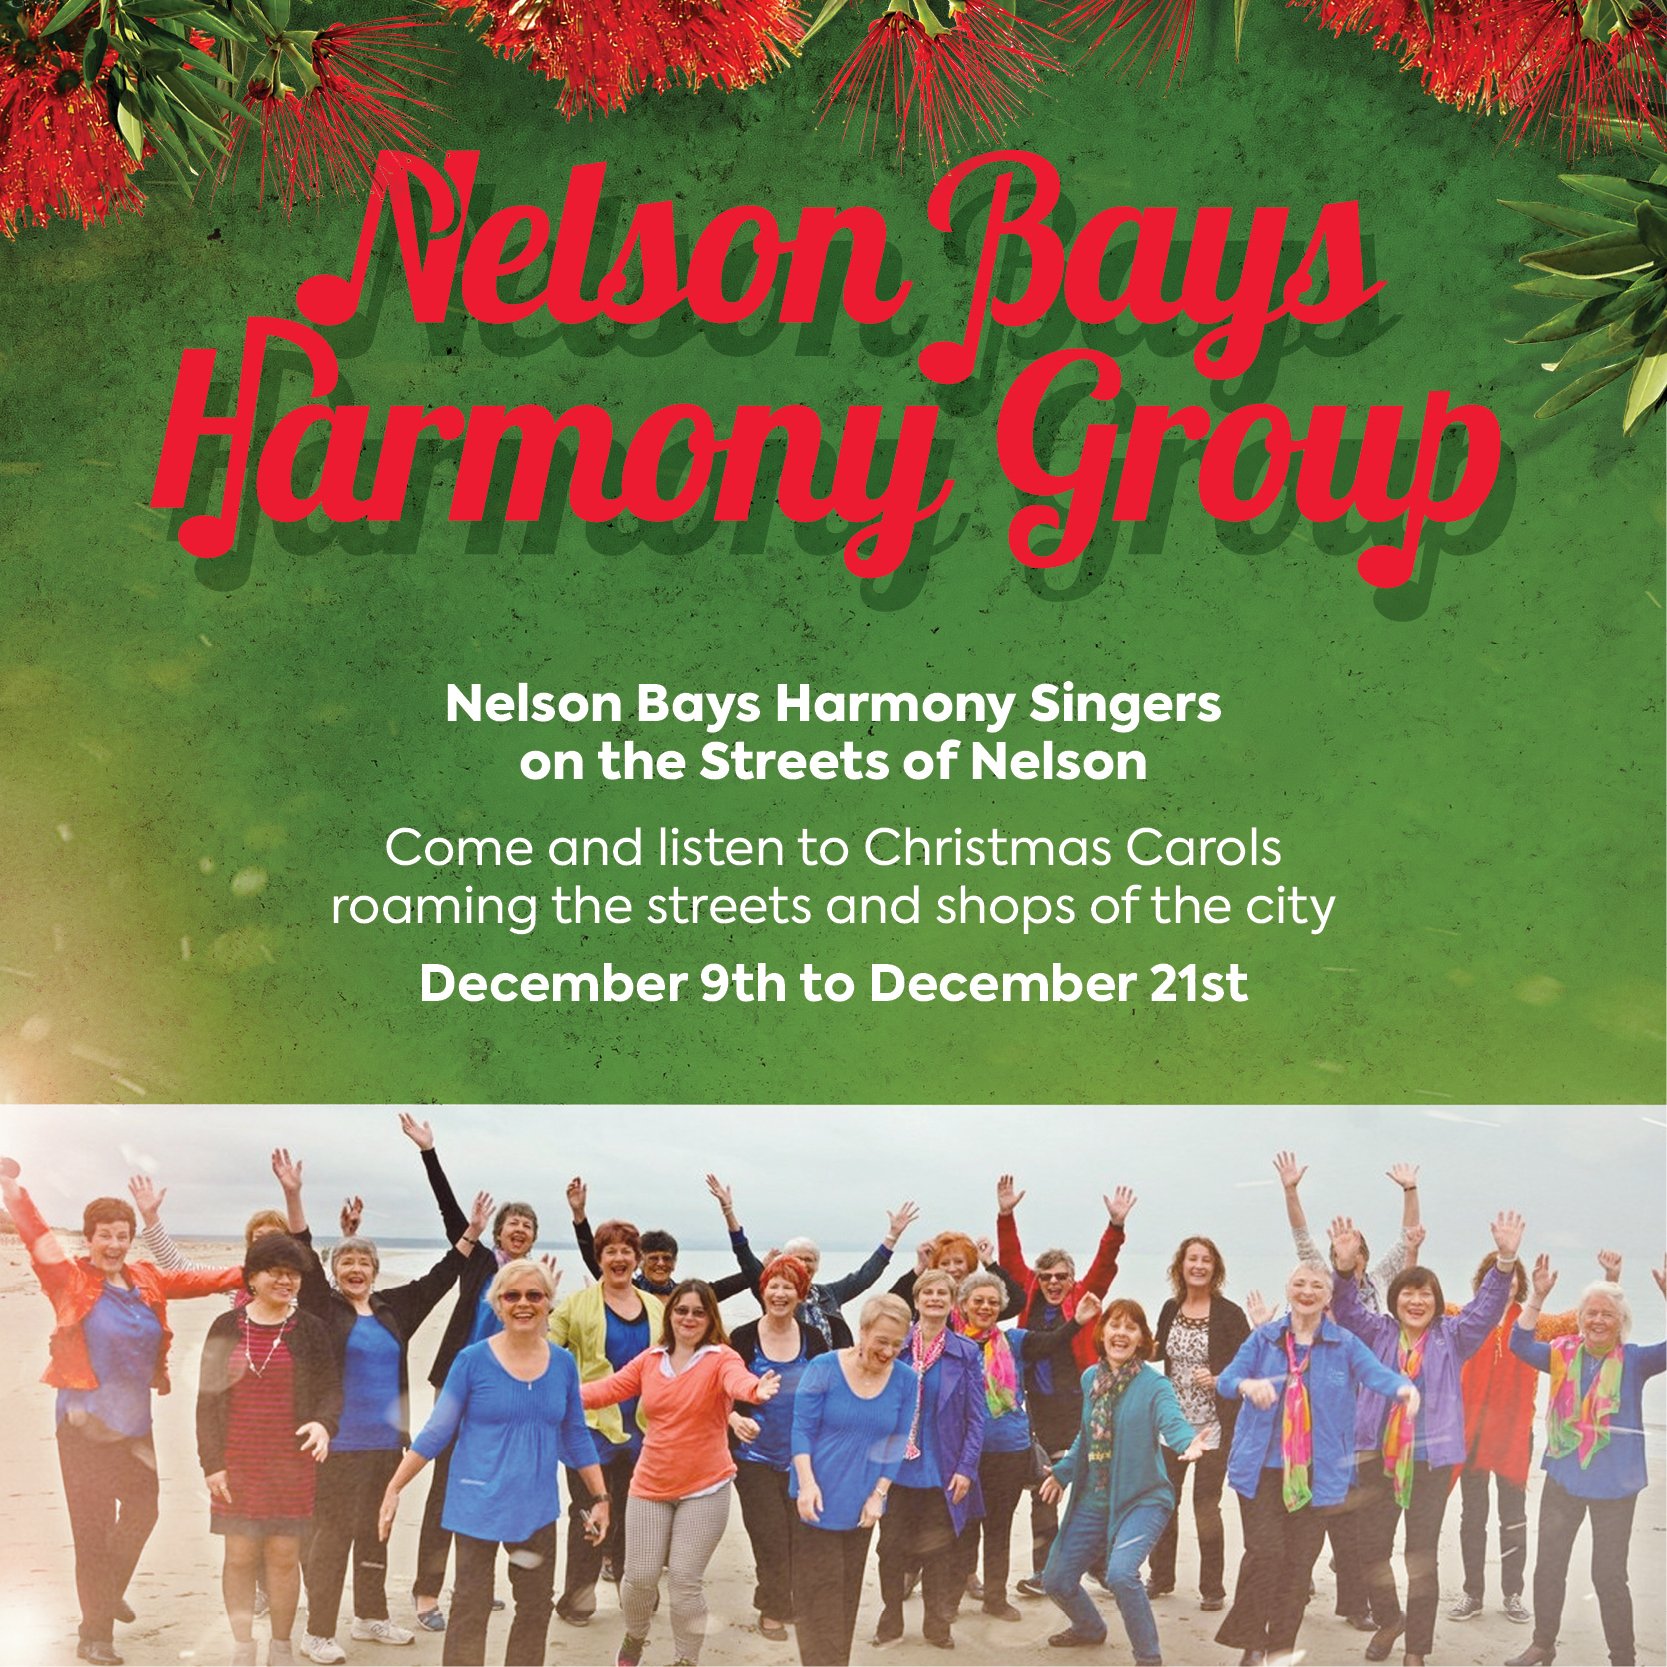 Christmas Carols by Nelson Bays Harmony Group Performance at Nelson